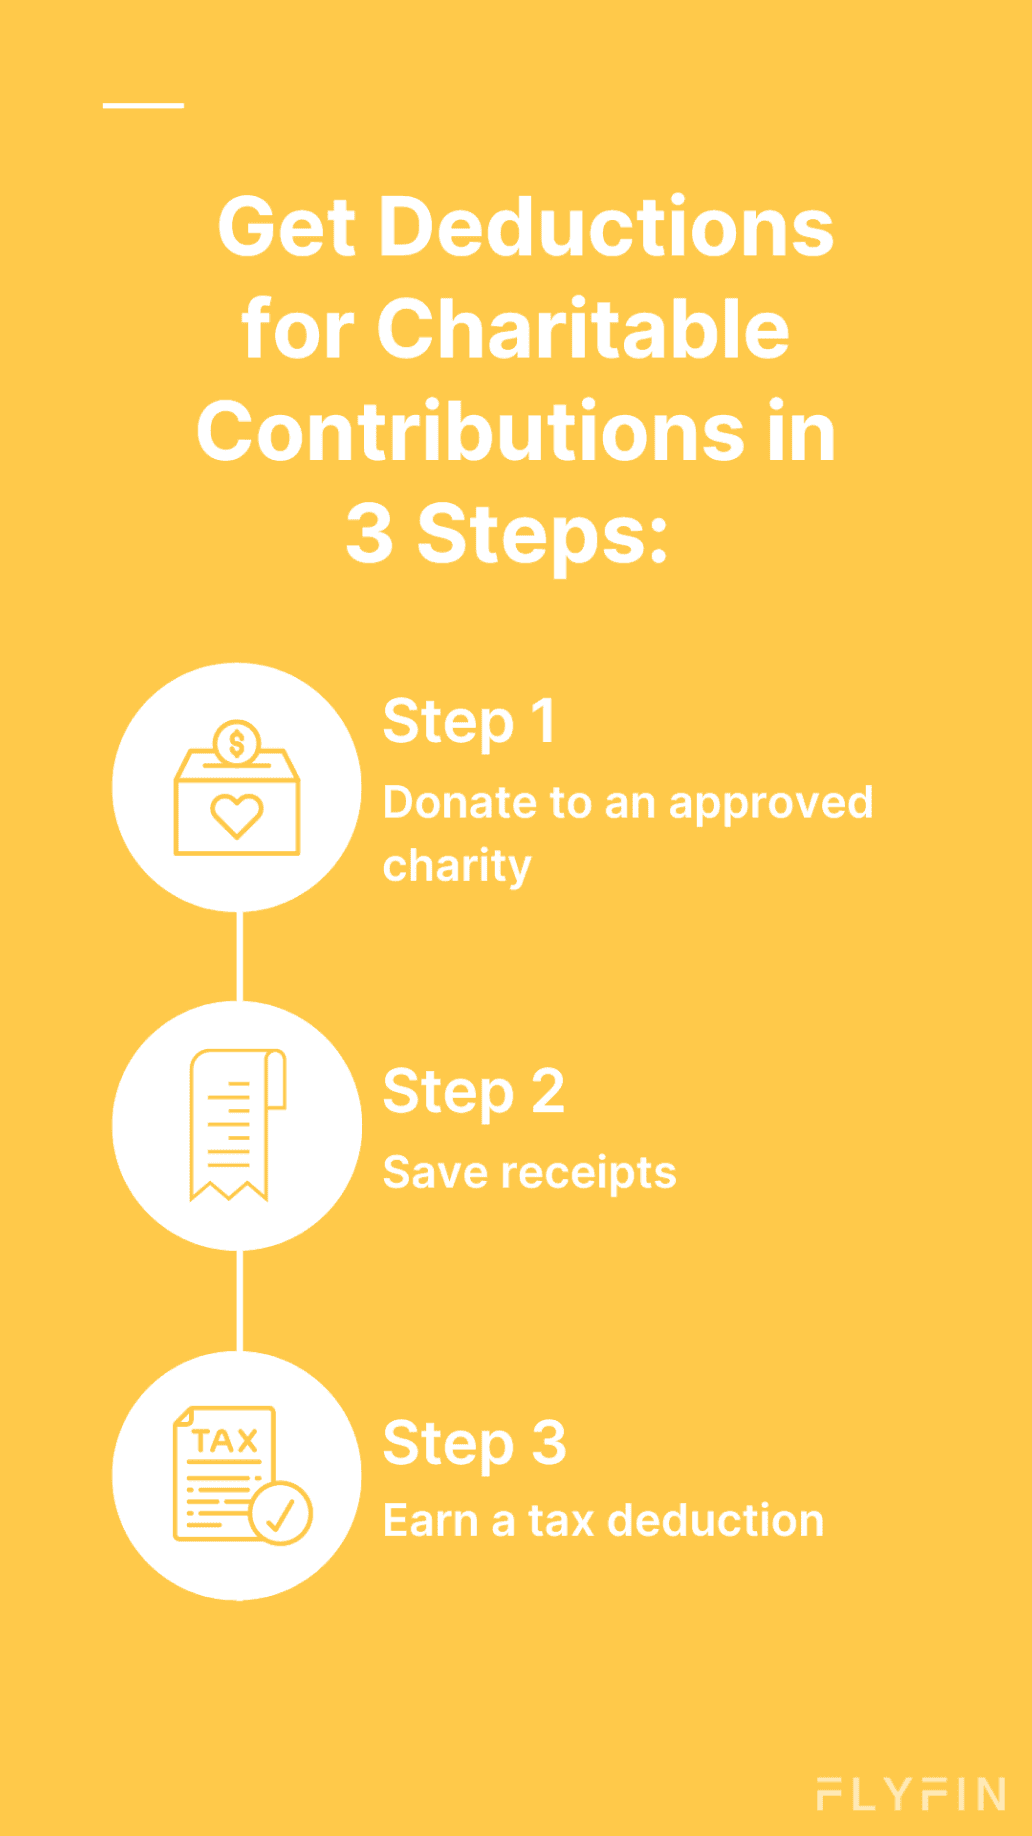 Image with text explaining 3 steps to get tax deductions for charitable contributions - donate to approved charity, save receipts, earn tax deduction.